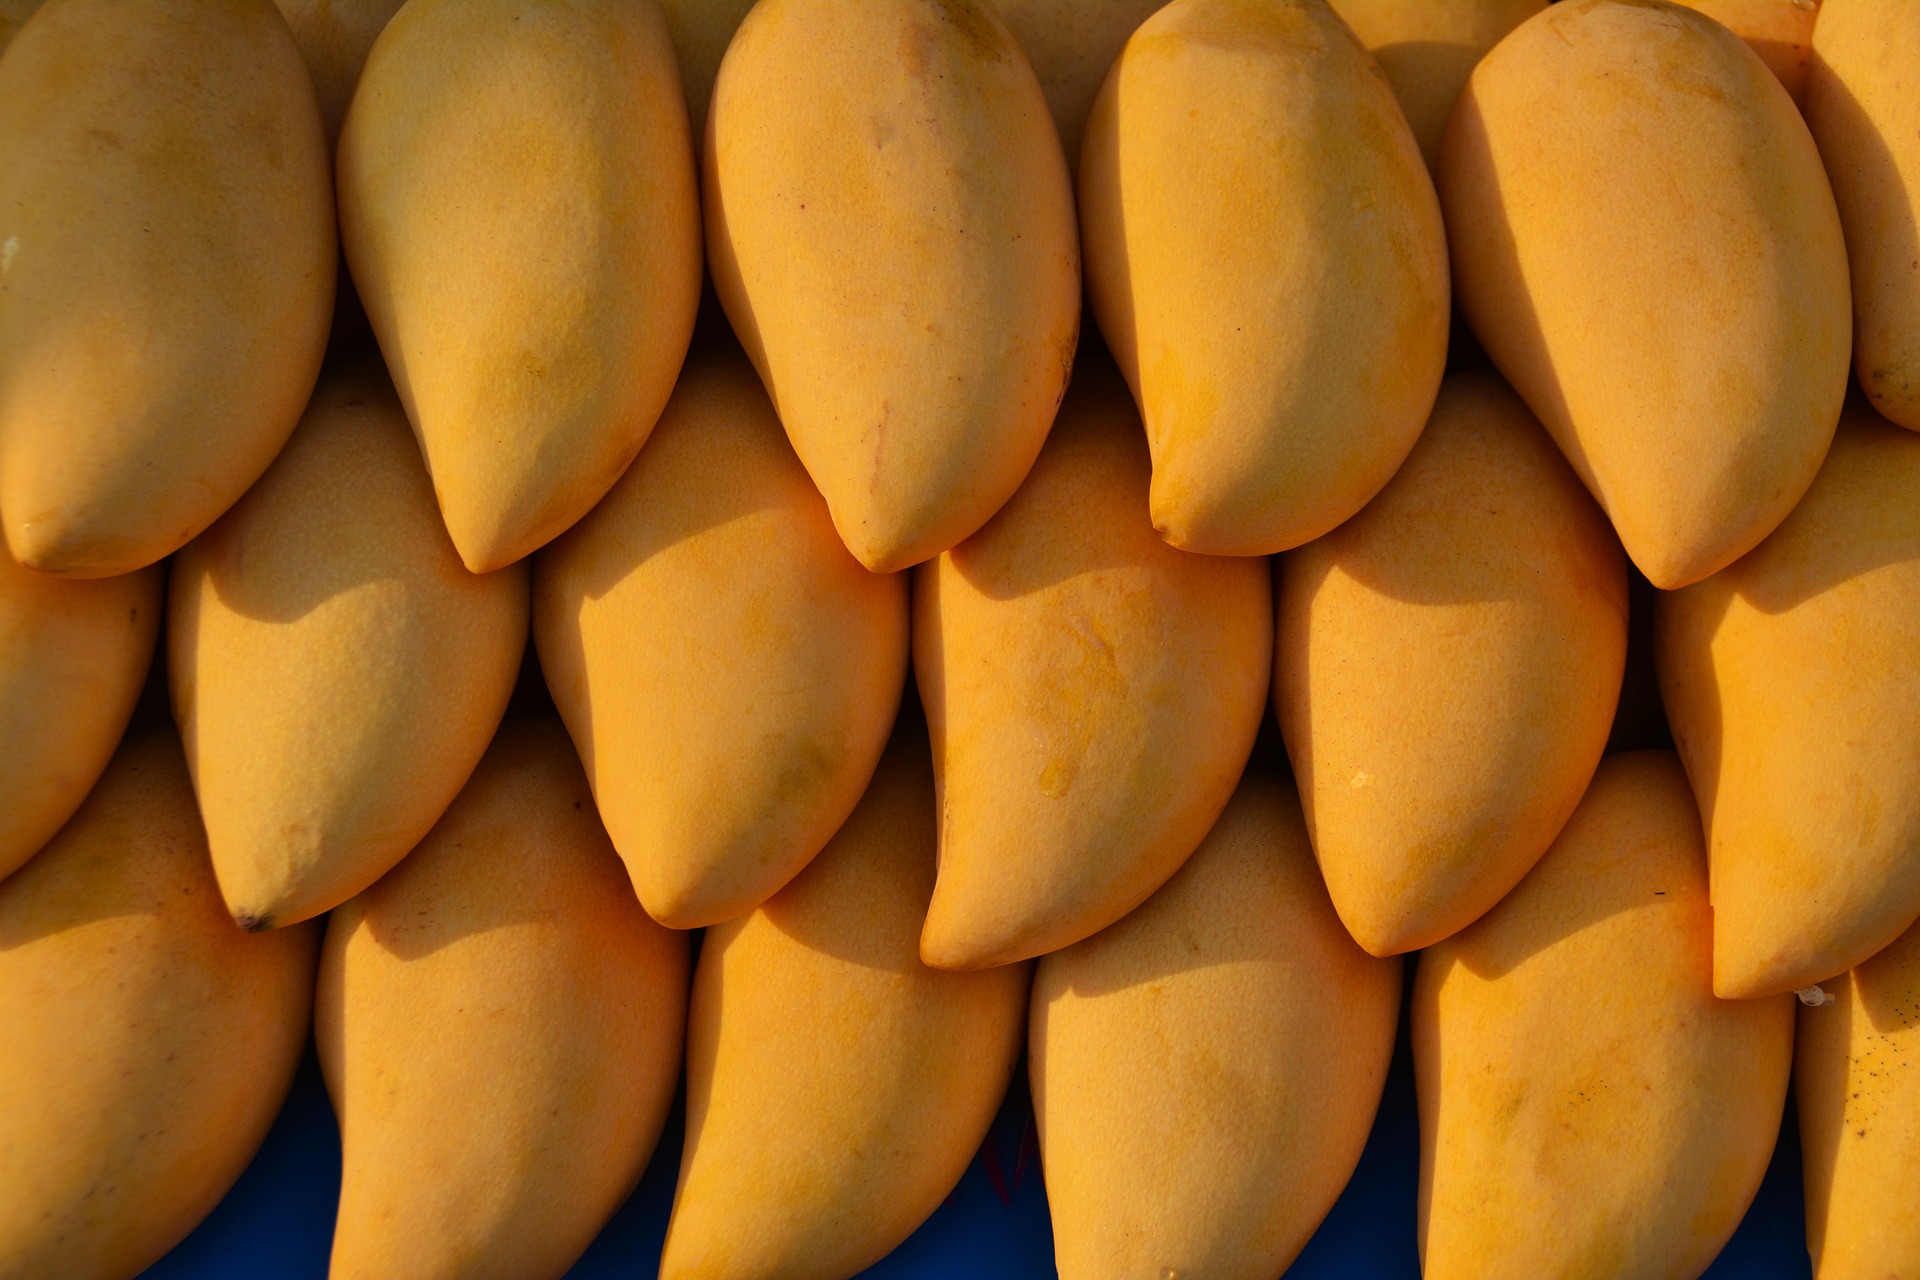 If You Eat Mangoes Every Day For 1 Month, This Happens To Your Body